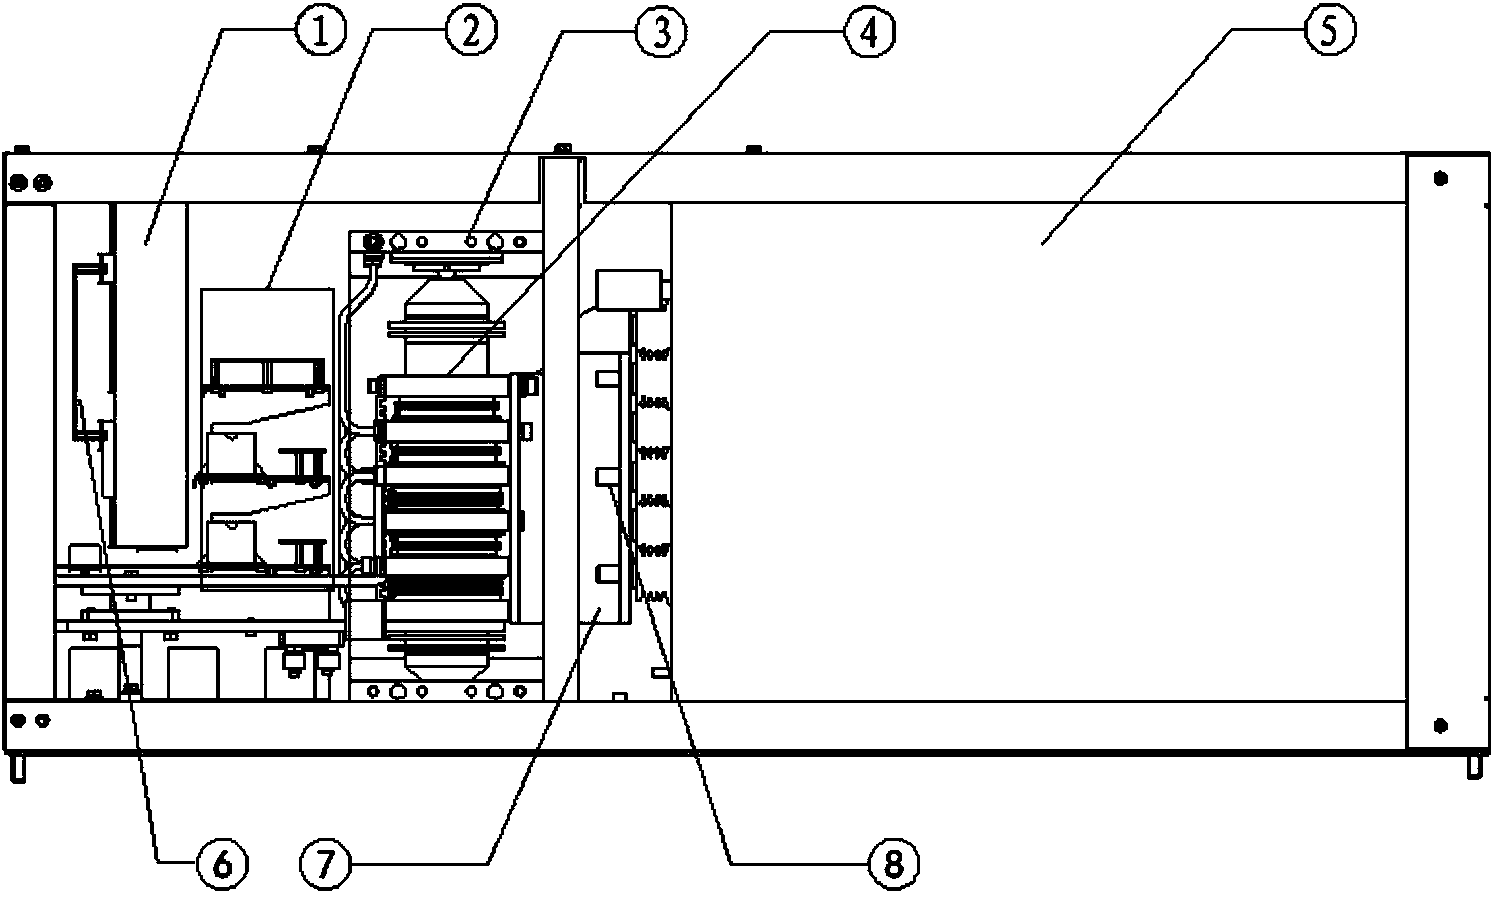 Direct-current draw-out power supply of IEGT power module